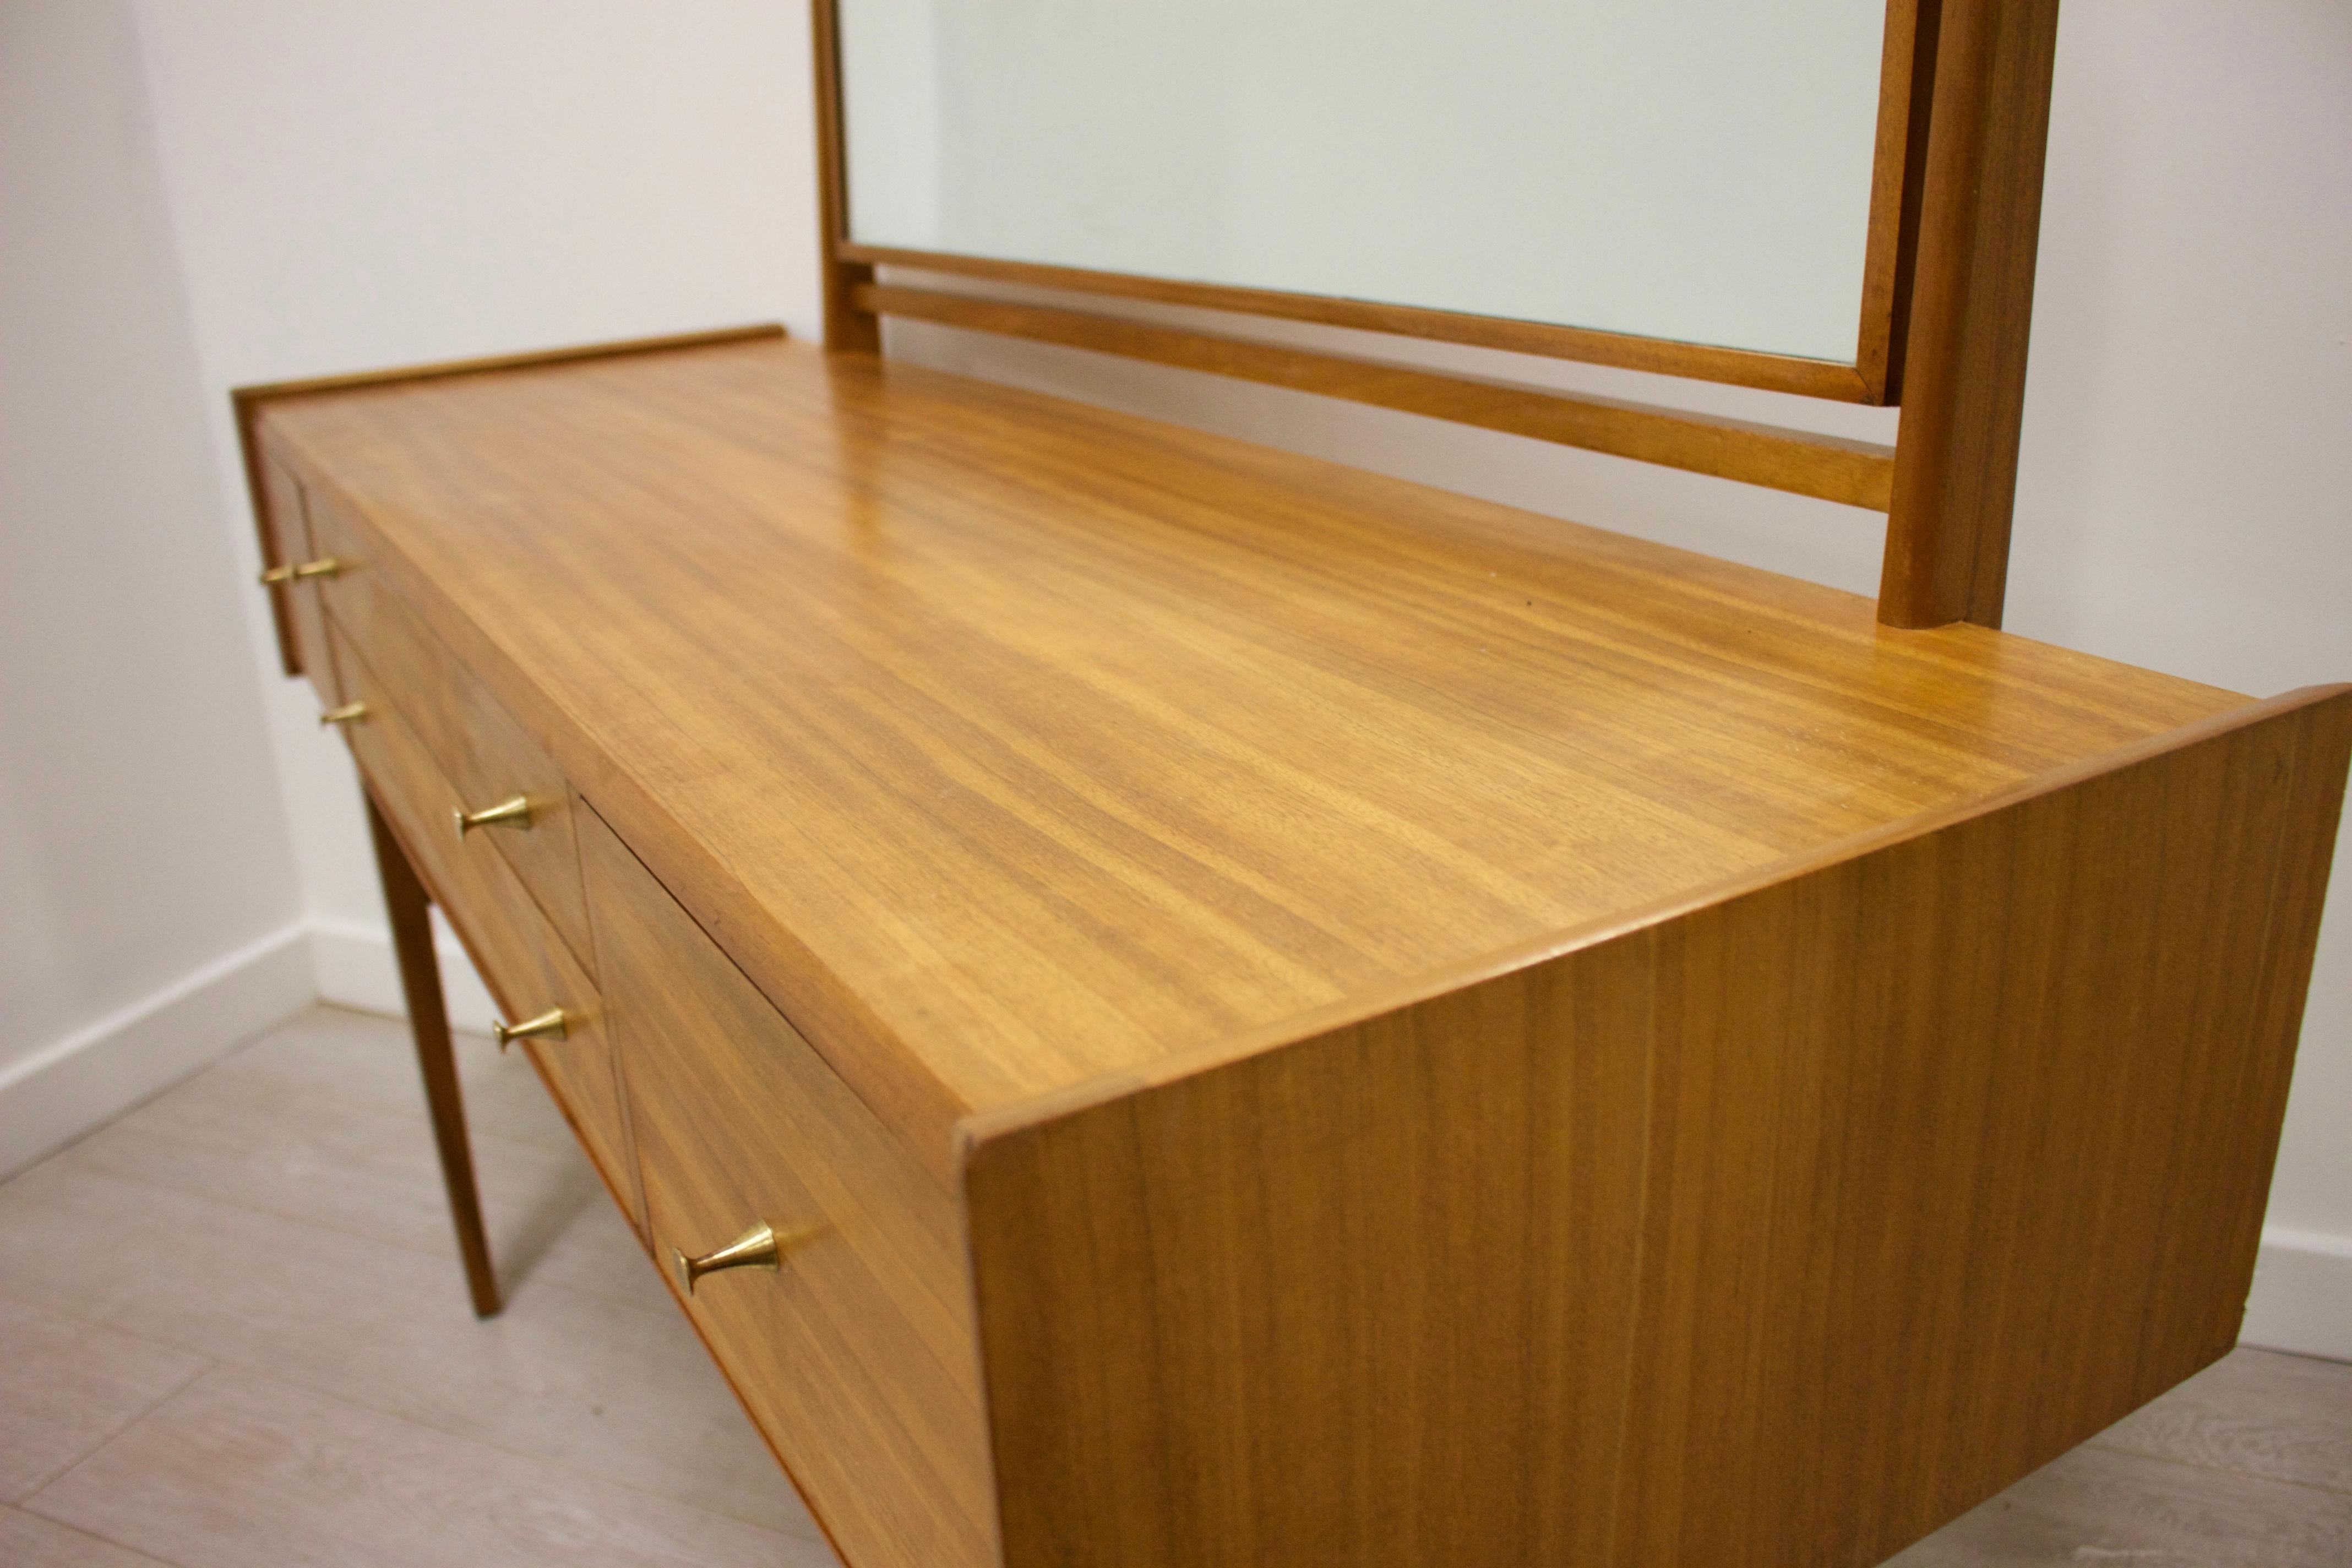 Midcentury Walnut Dressing Table from a. Younger Ltd., 1960s (Furnier)